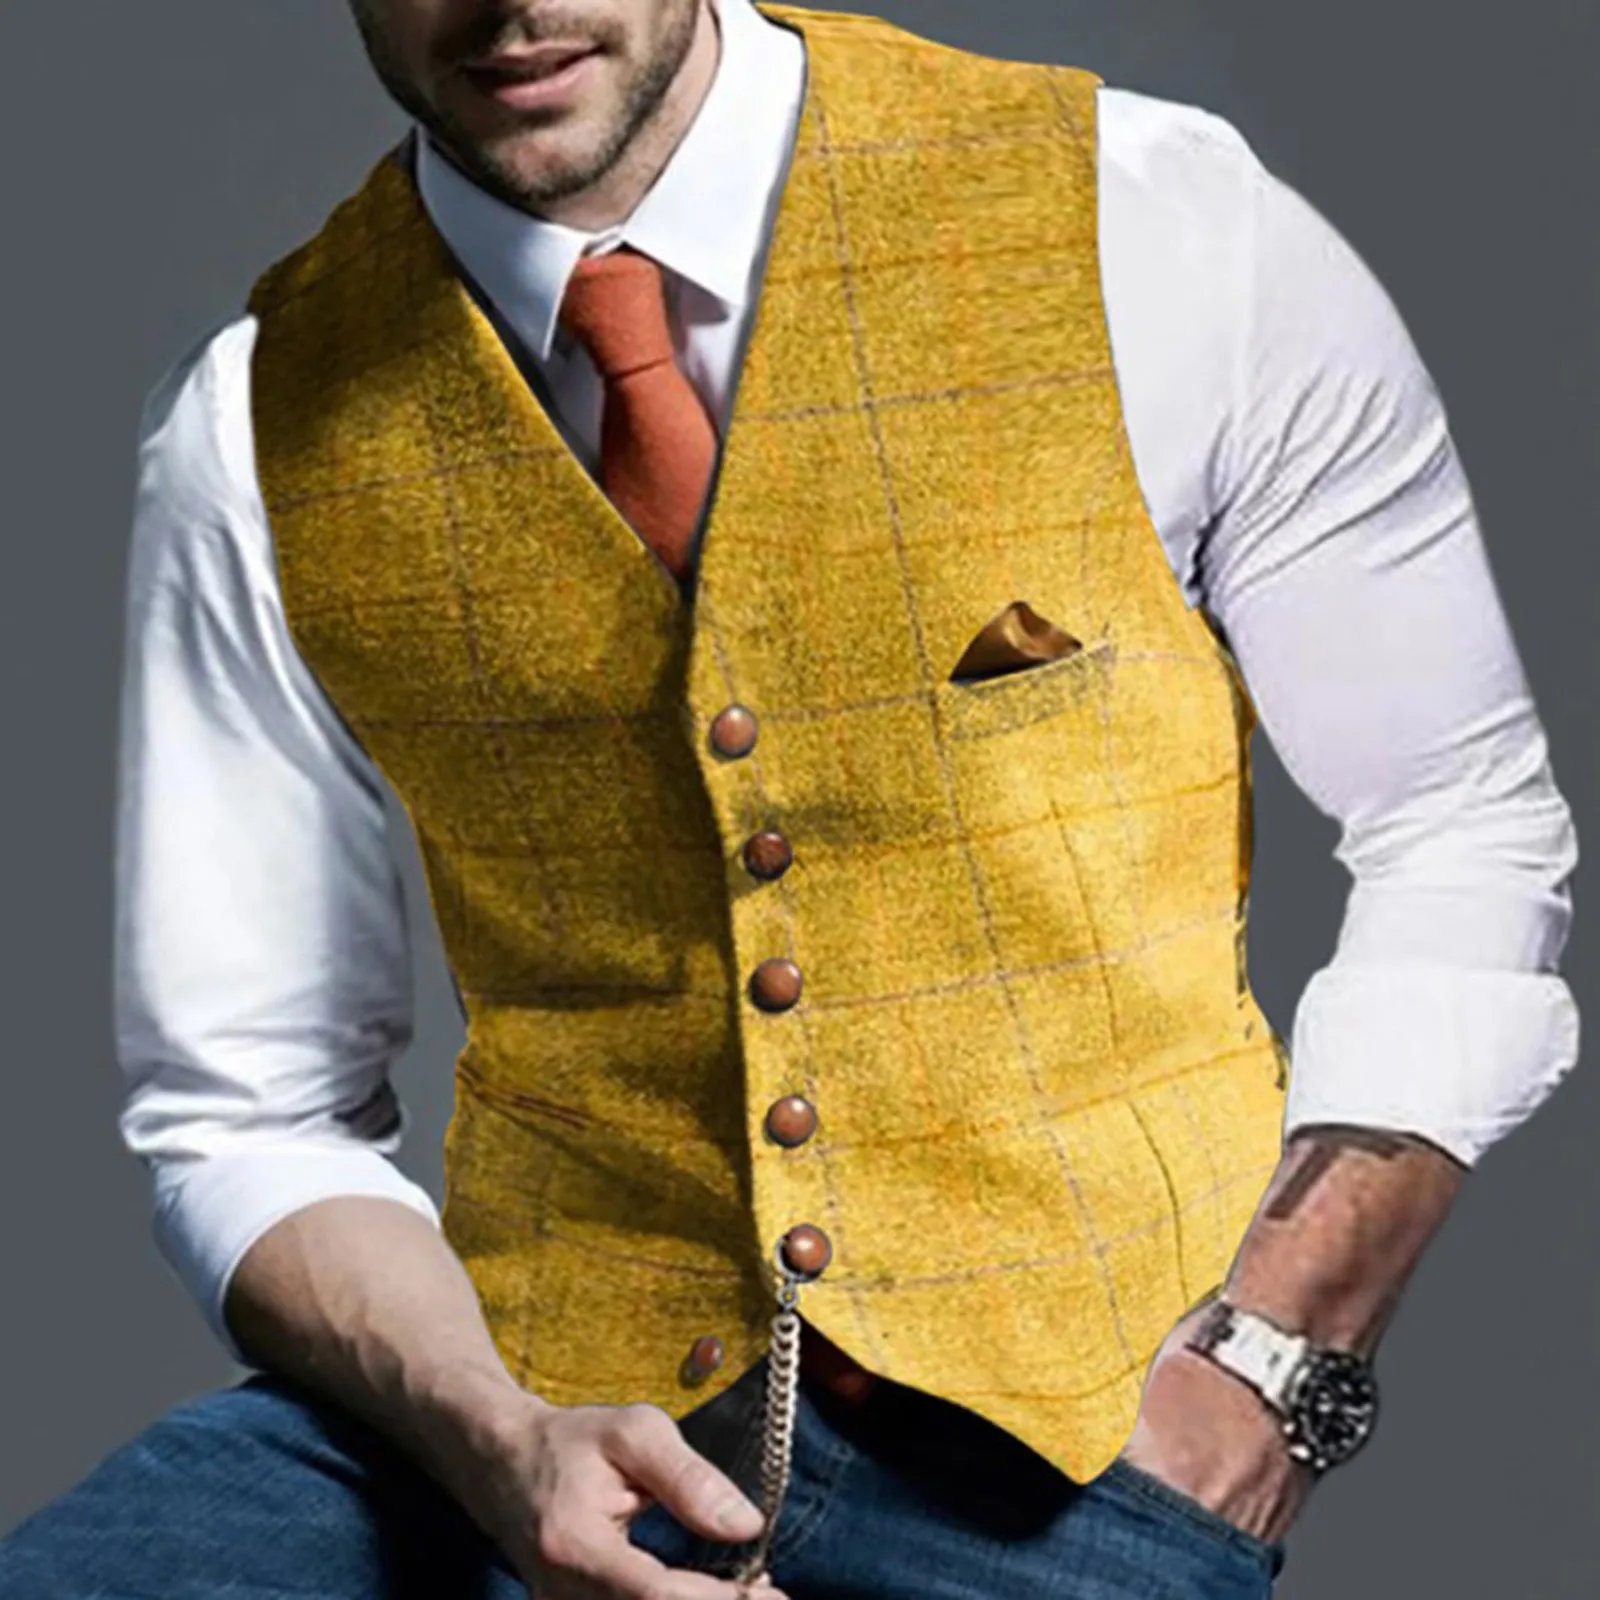 iHENGH Mens Waistcoat Tweed with Pockets and Button Front Suit Vest Slim Fit for Business Formal Wedding 